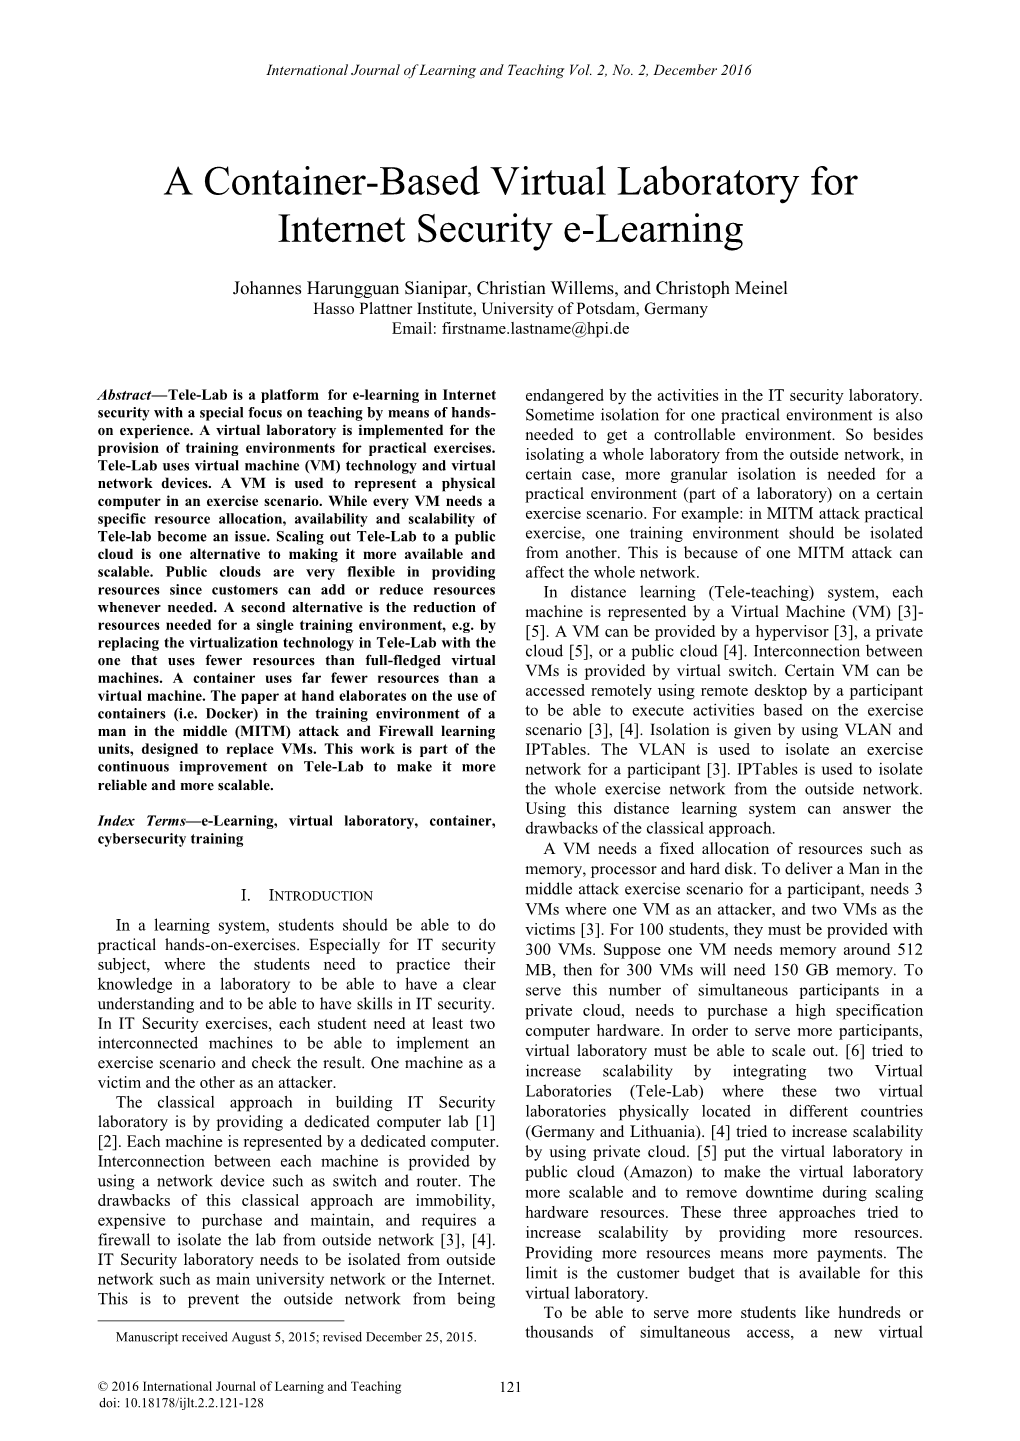 A Container-Based Virtual Laboratory for Internet Security E-Learning